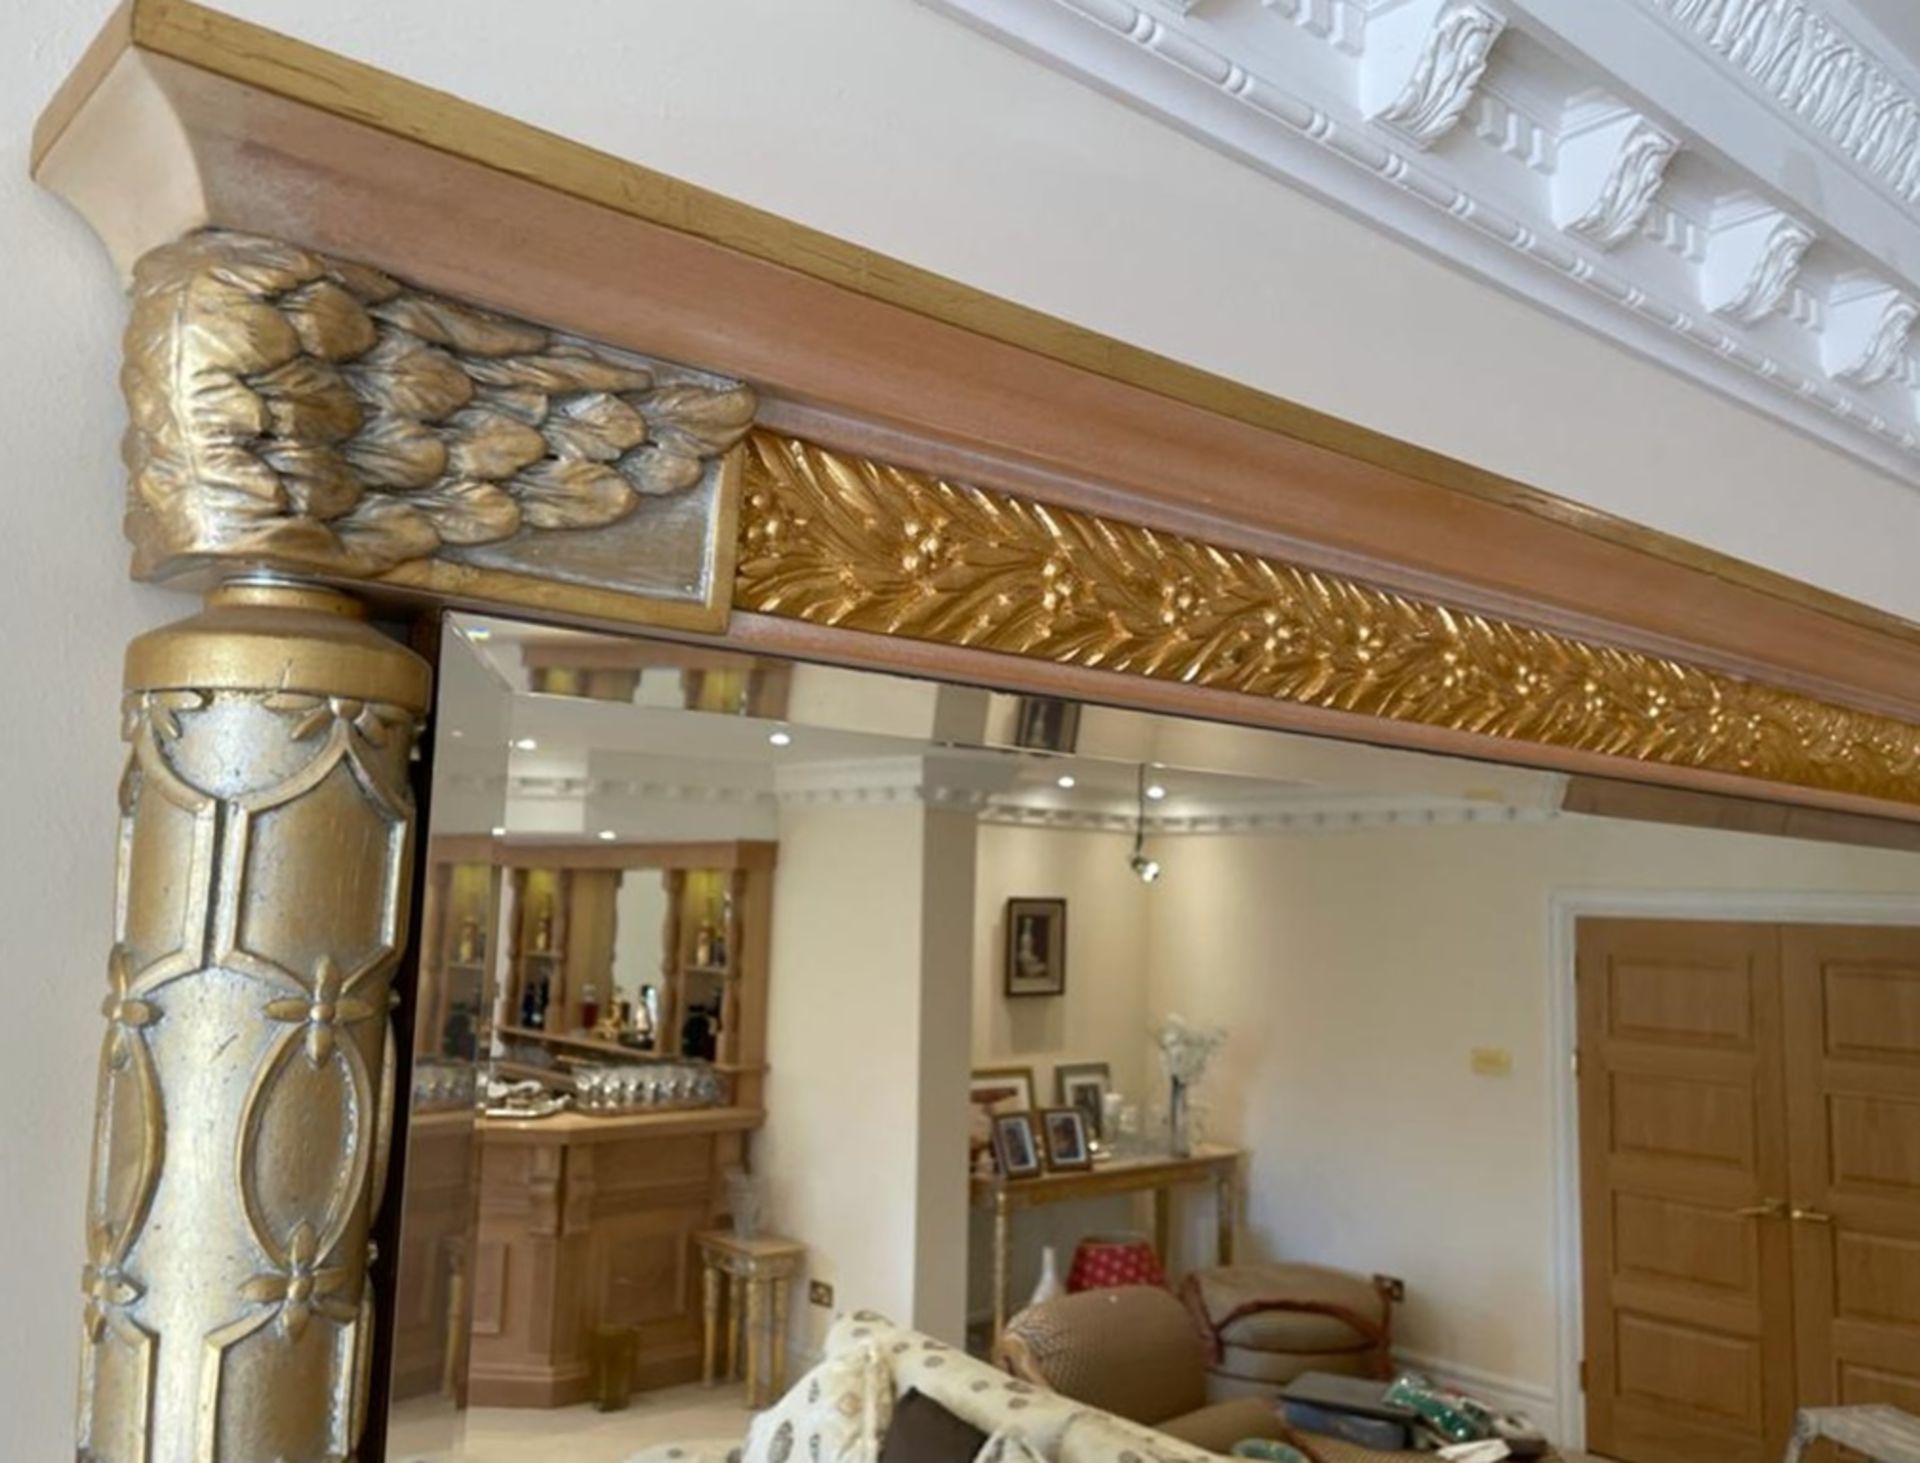 1 x Ornate Overmantel Wall Mirror With Fine Carving Work and Moulded Cornice - Features a Bevelled - Image 7 of 9